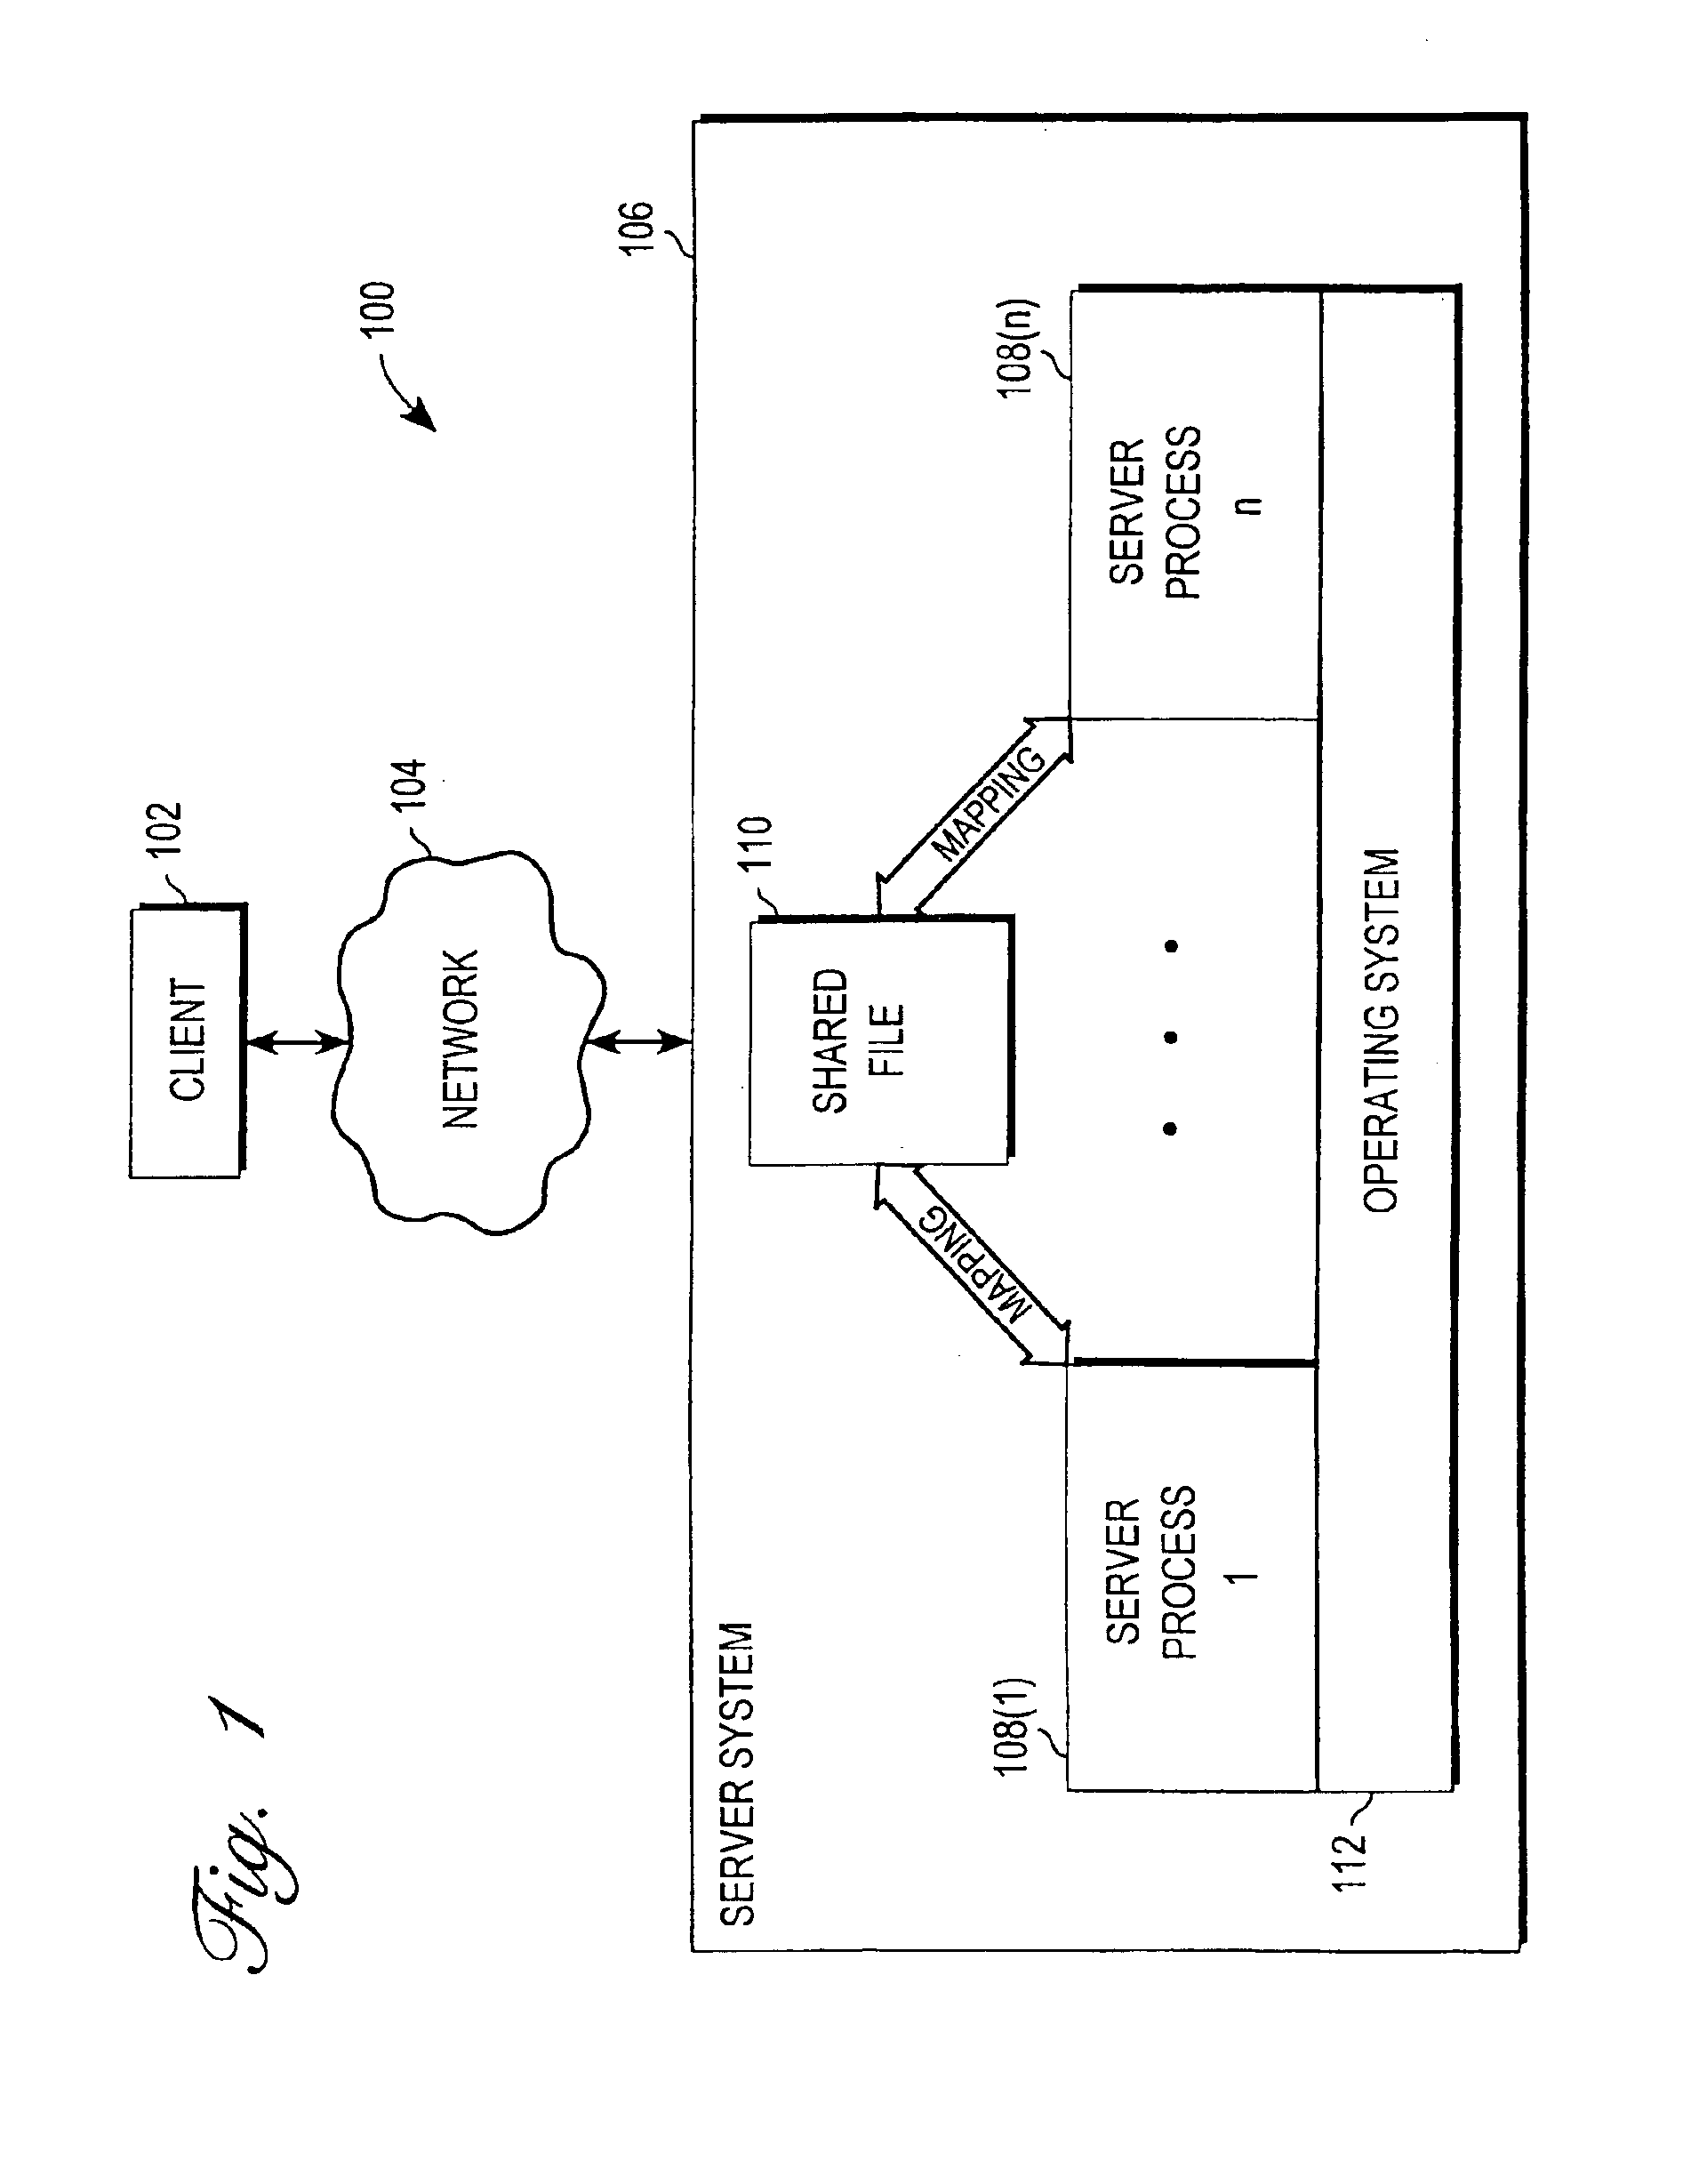 Mechanism for enabling session information to be shared across multiple processes